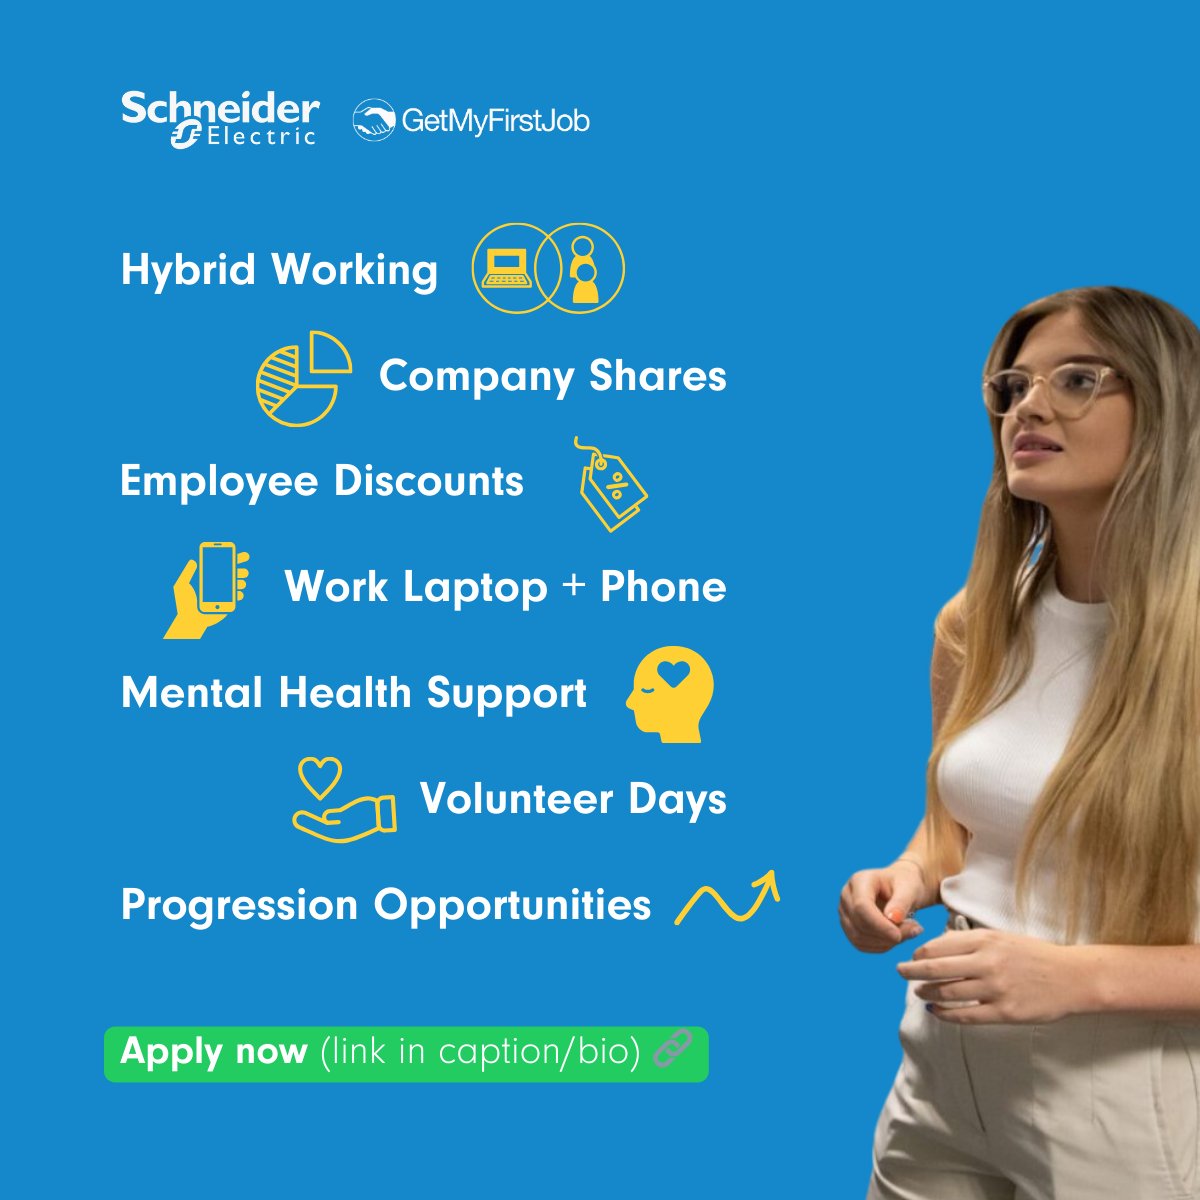 📣 Want to start an exciting career with #sustainability at its core? @SchneiderElectricUKI is on a mission to be a #digital partner for sustainability + efficiency; making an impact by helping people become more resilient, #electric + digital. Apply 👉 peoplefirst.getmyfirstjob.co.uk/search